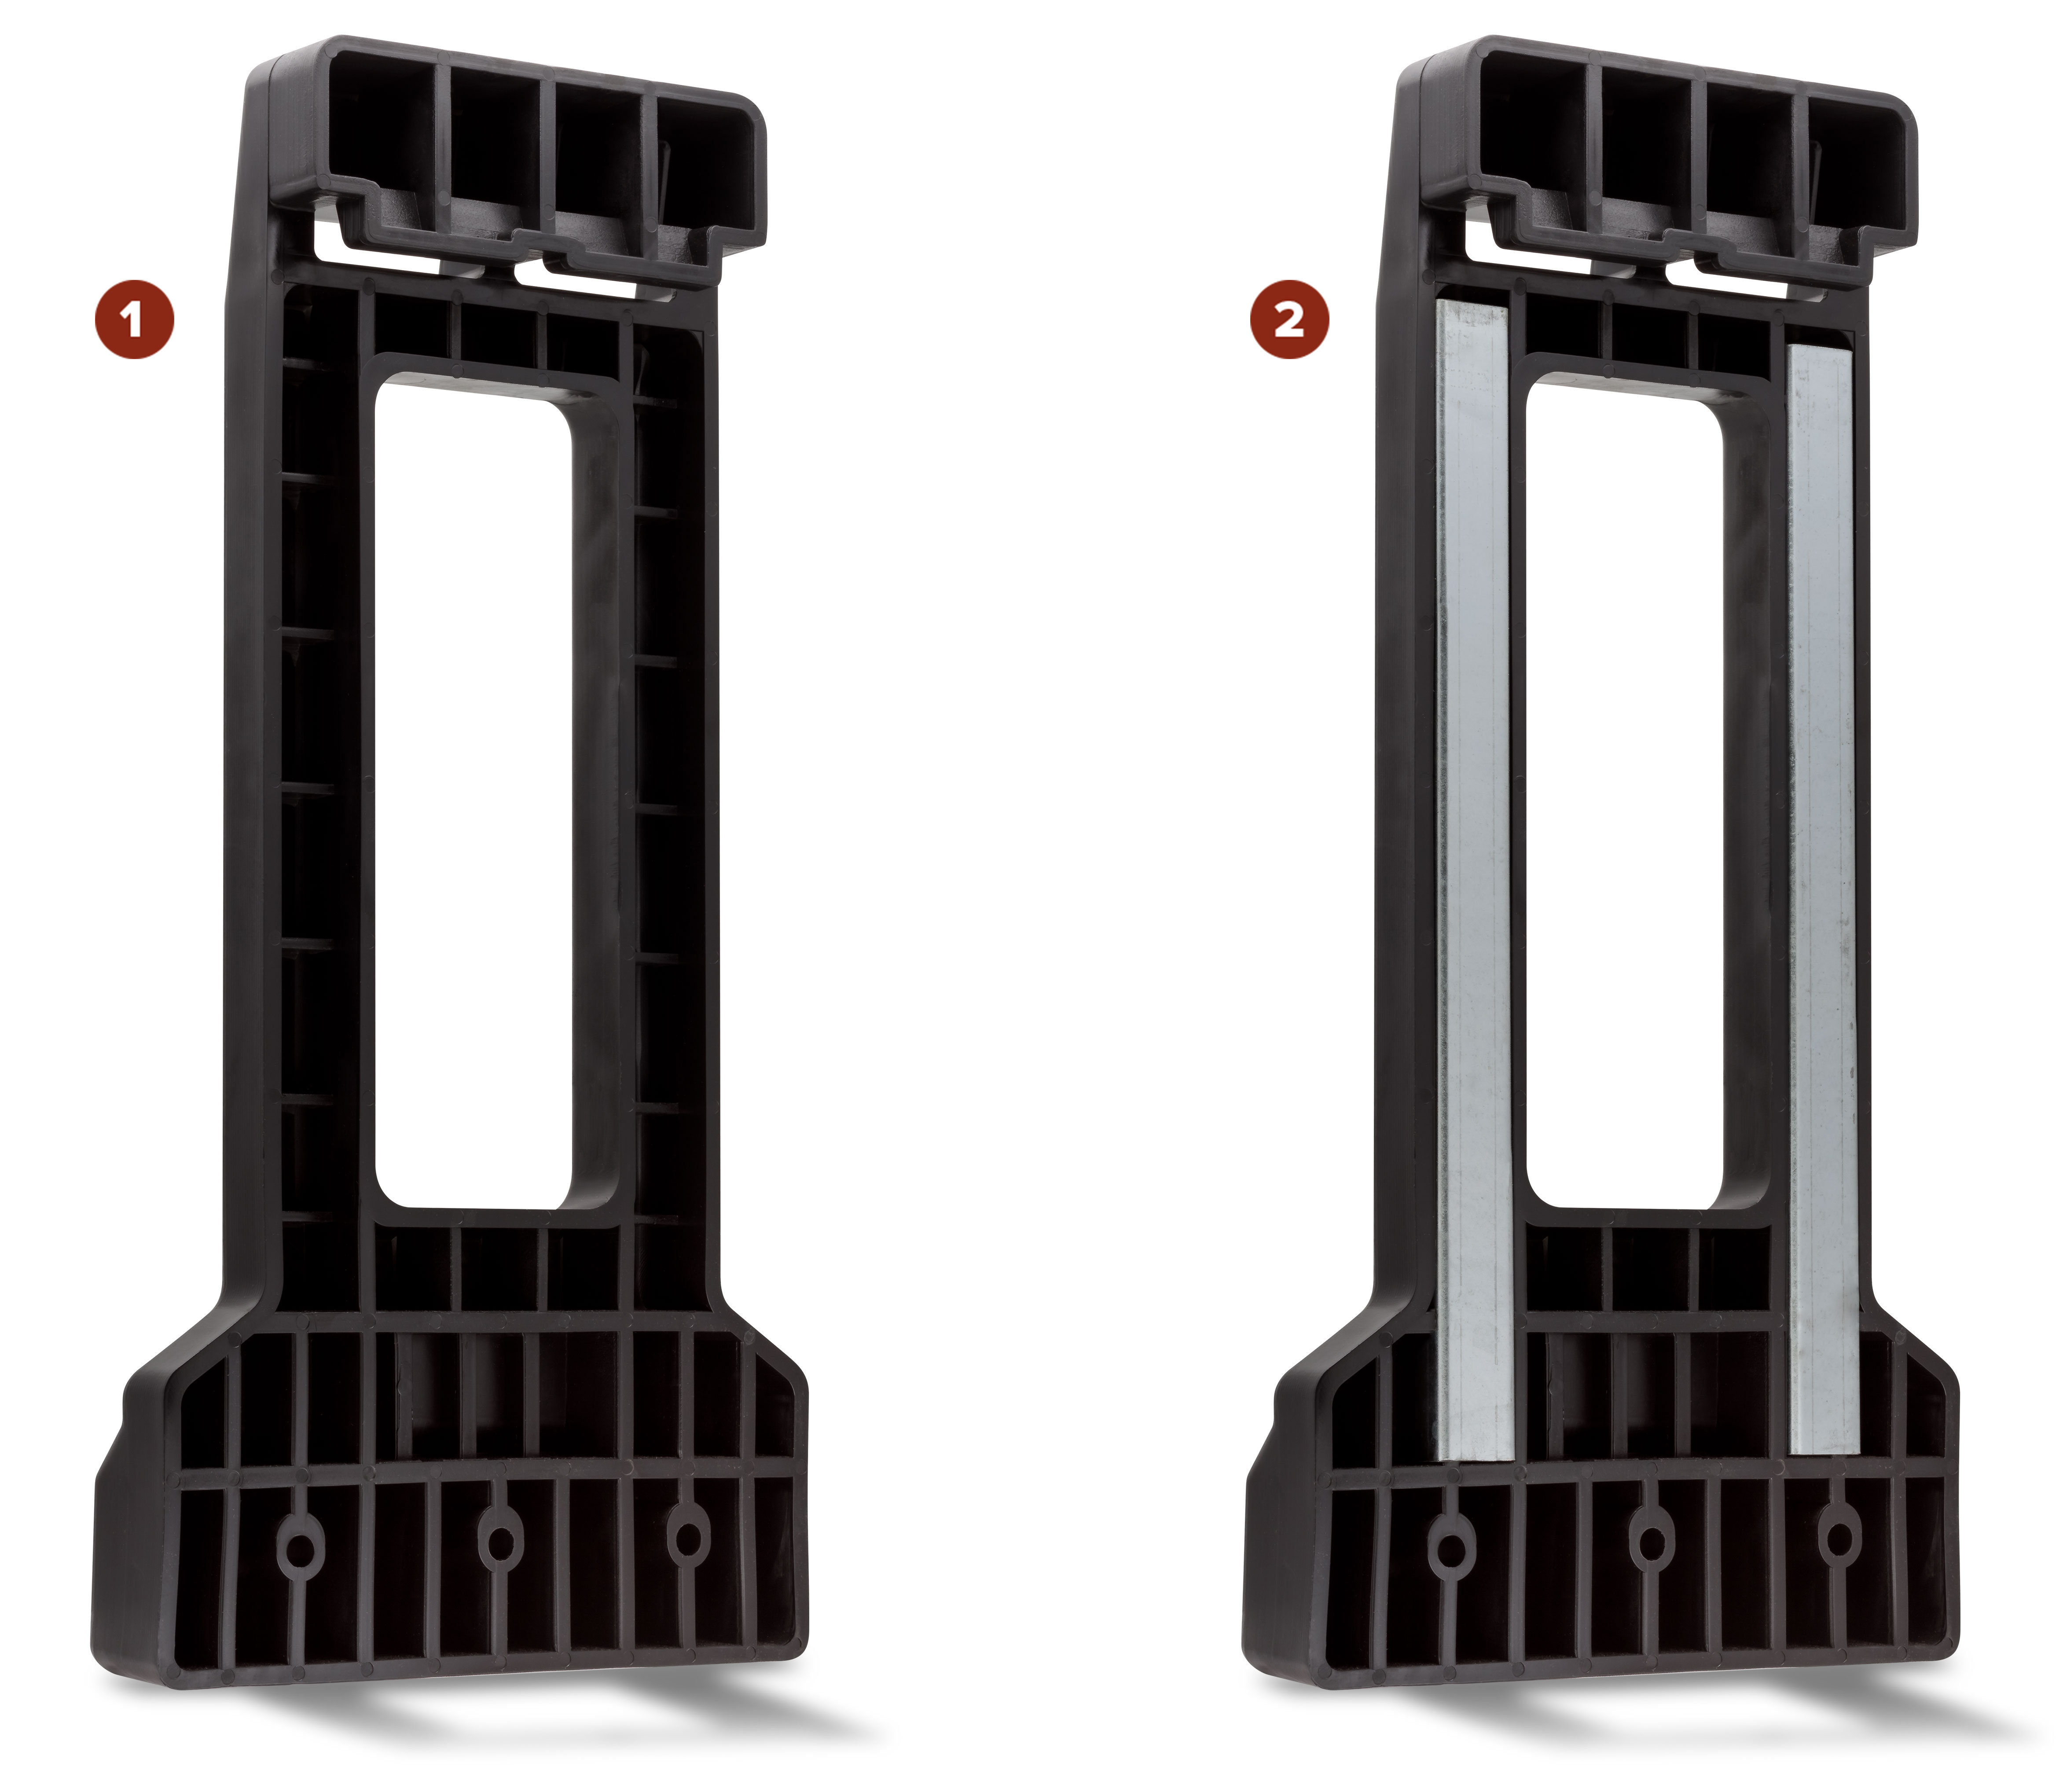 Side by side comparison of Pallet Dawg and Bull Dawg forklift carriage bumpers